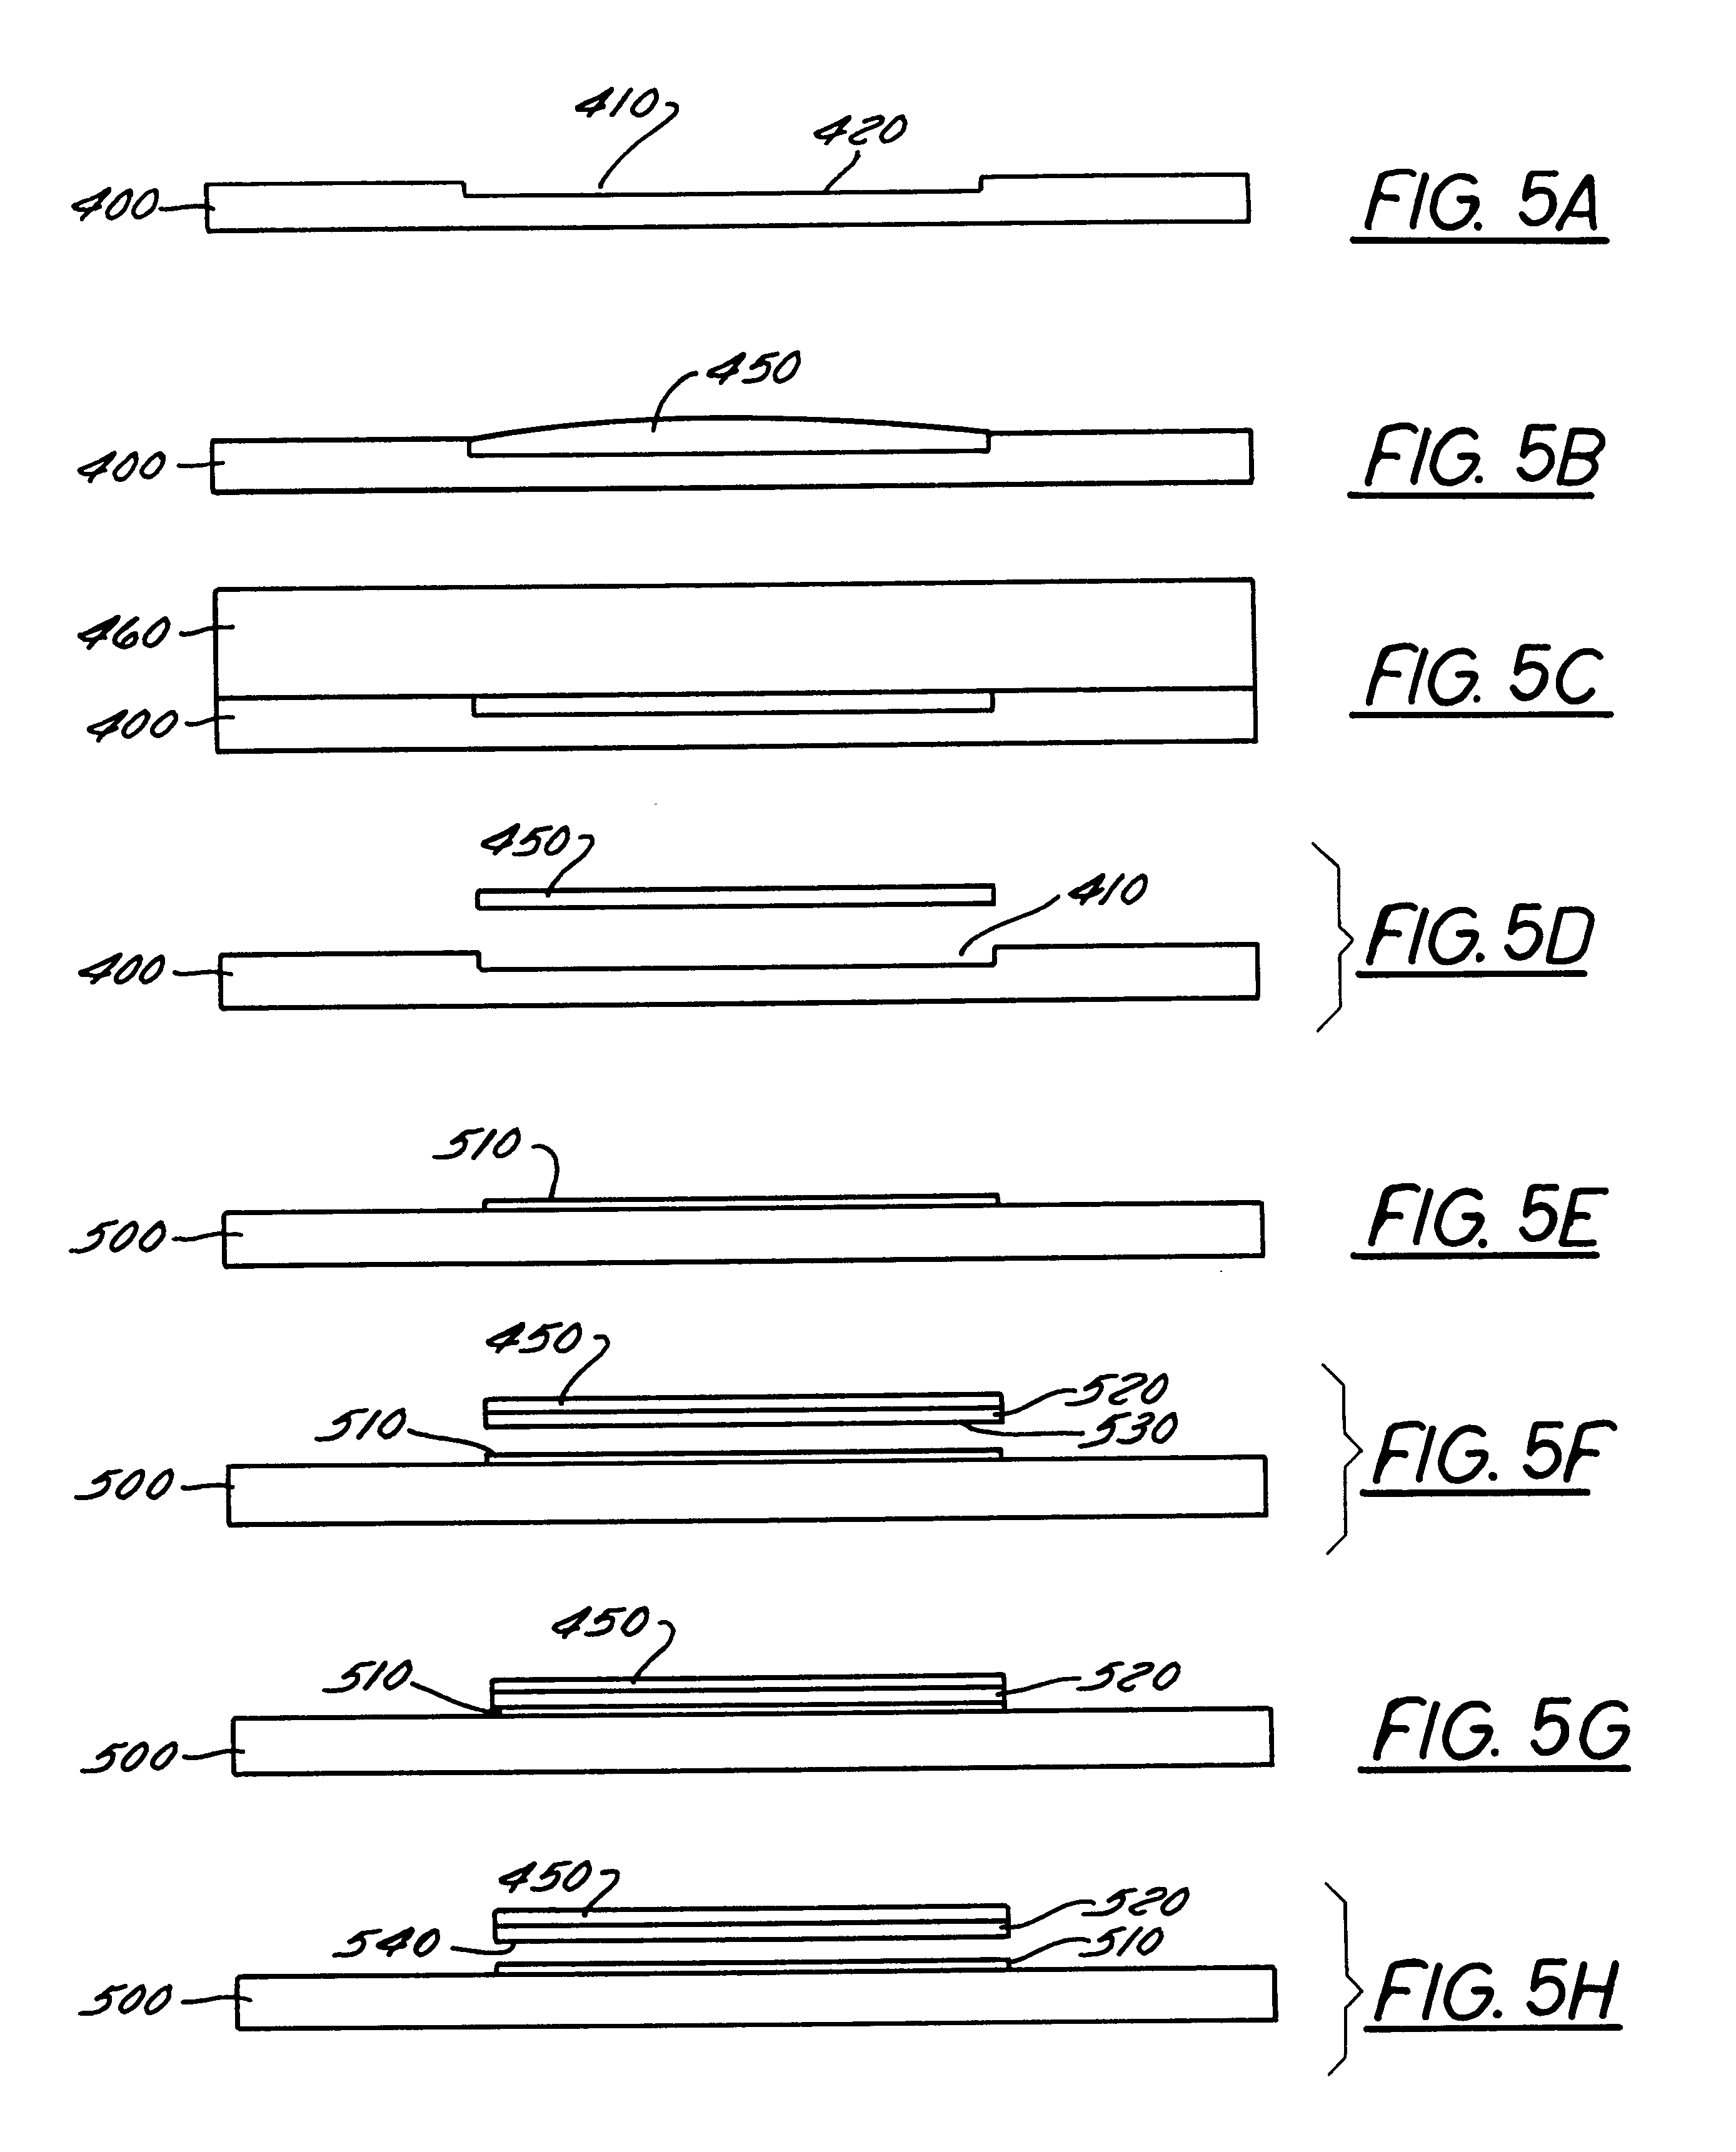 Composition for use in making optical components